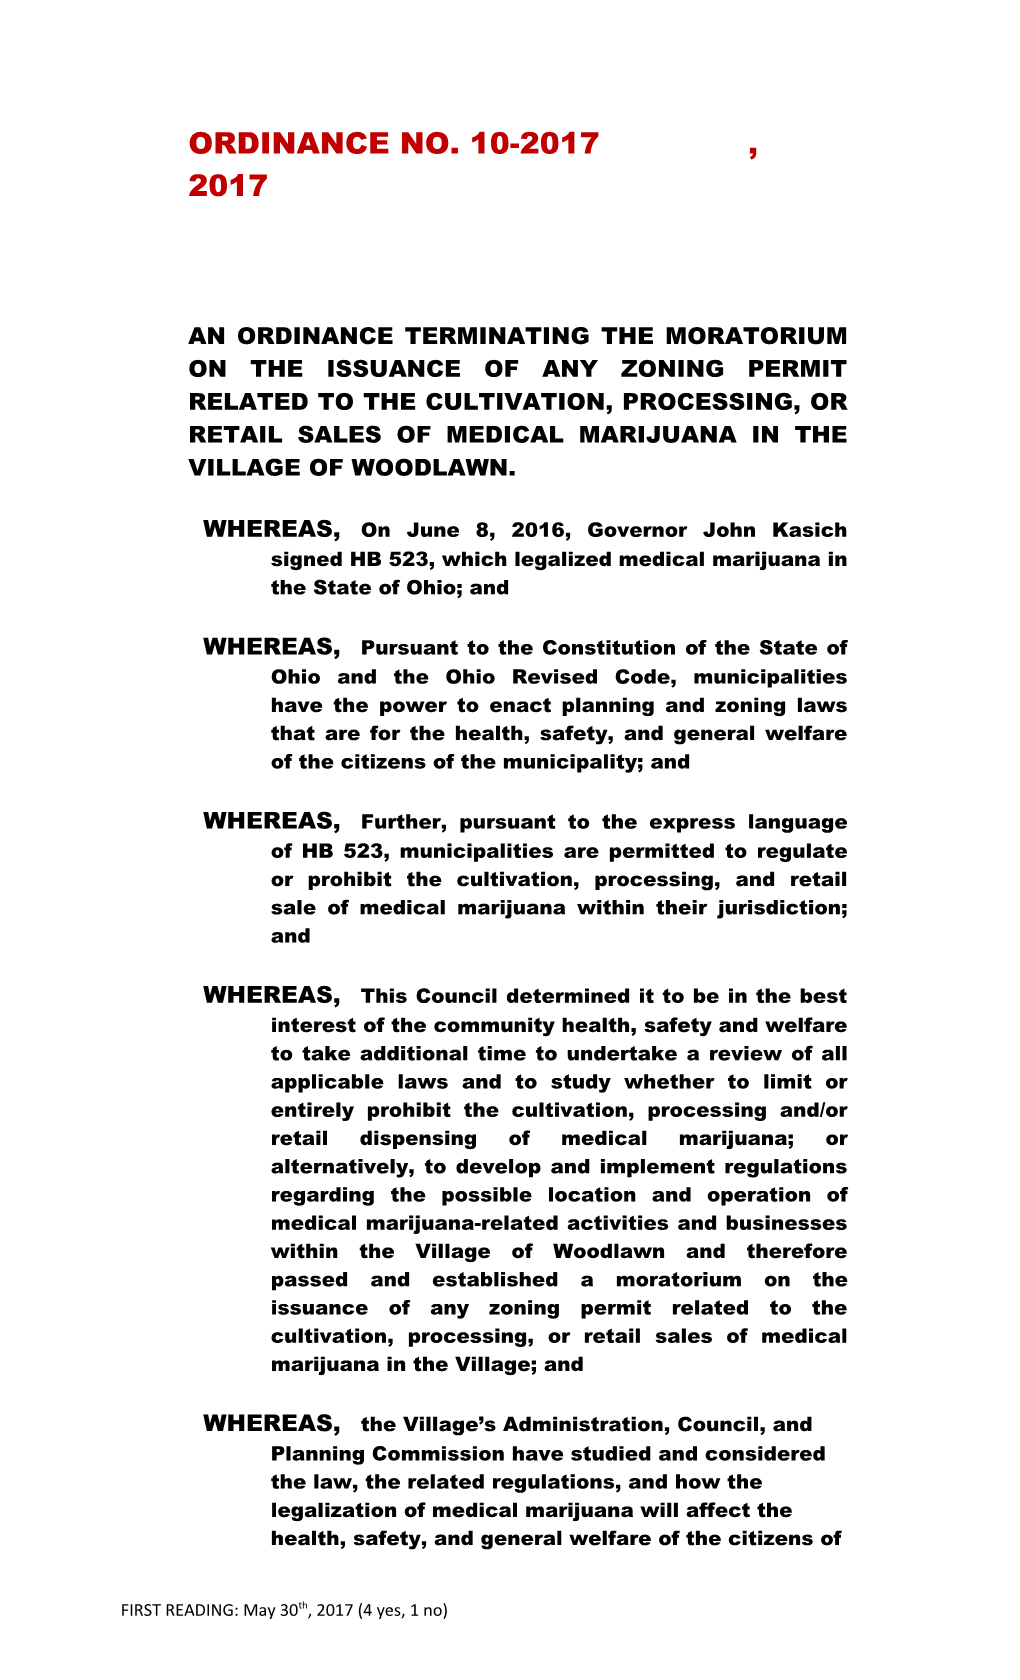 An Ordinance Terminating the Moratorium on the Issuance of Any Zoning Permit Related To